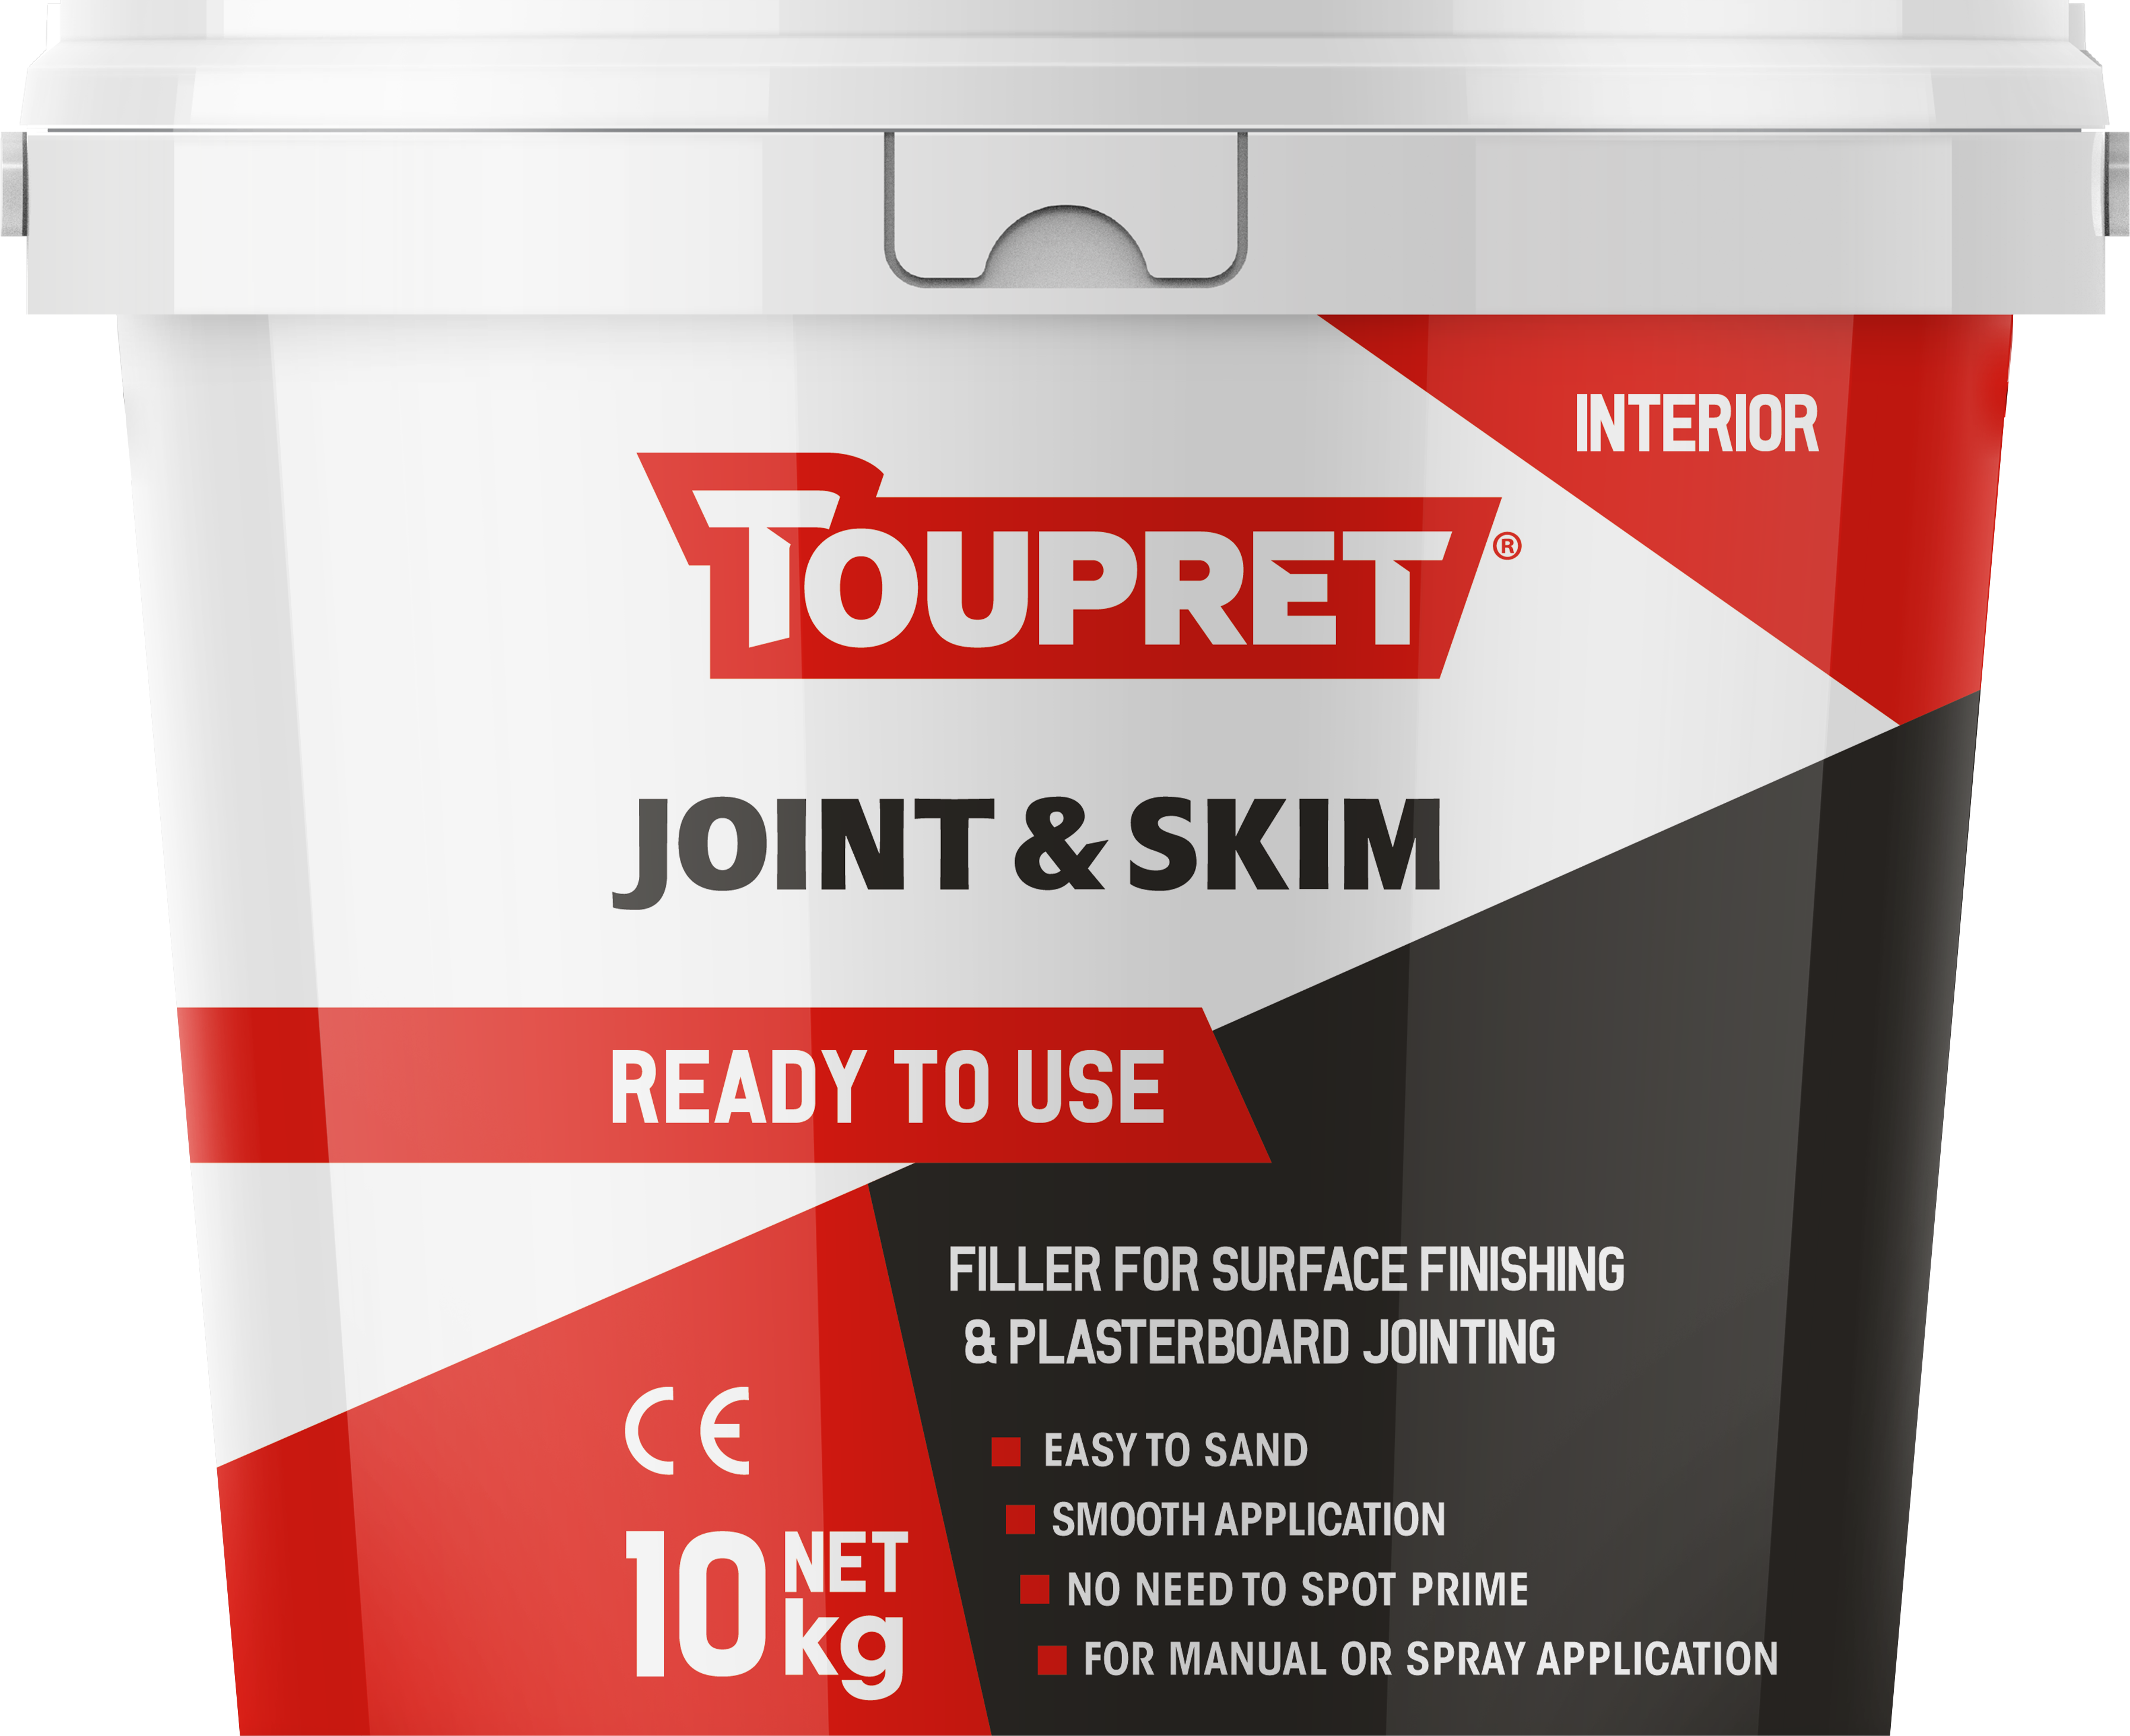 Toupret Joint & Skim - Ready to Use 10kg NEW!